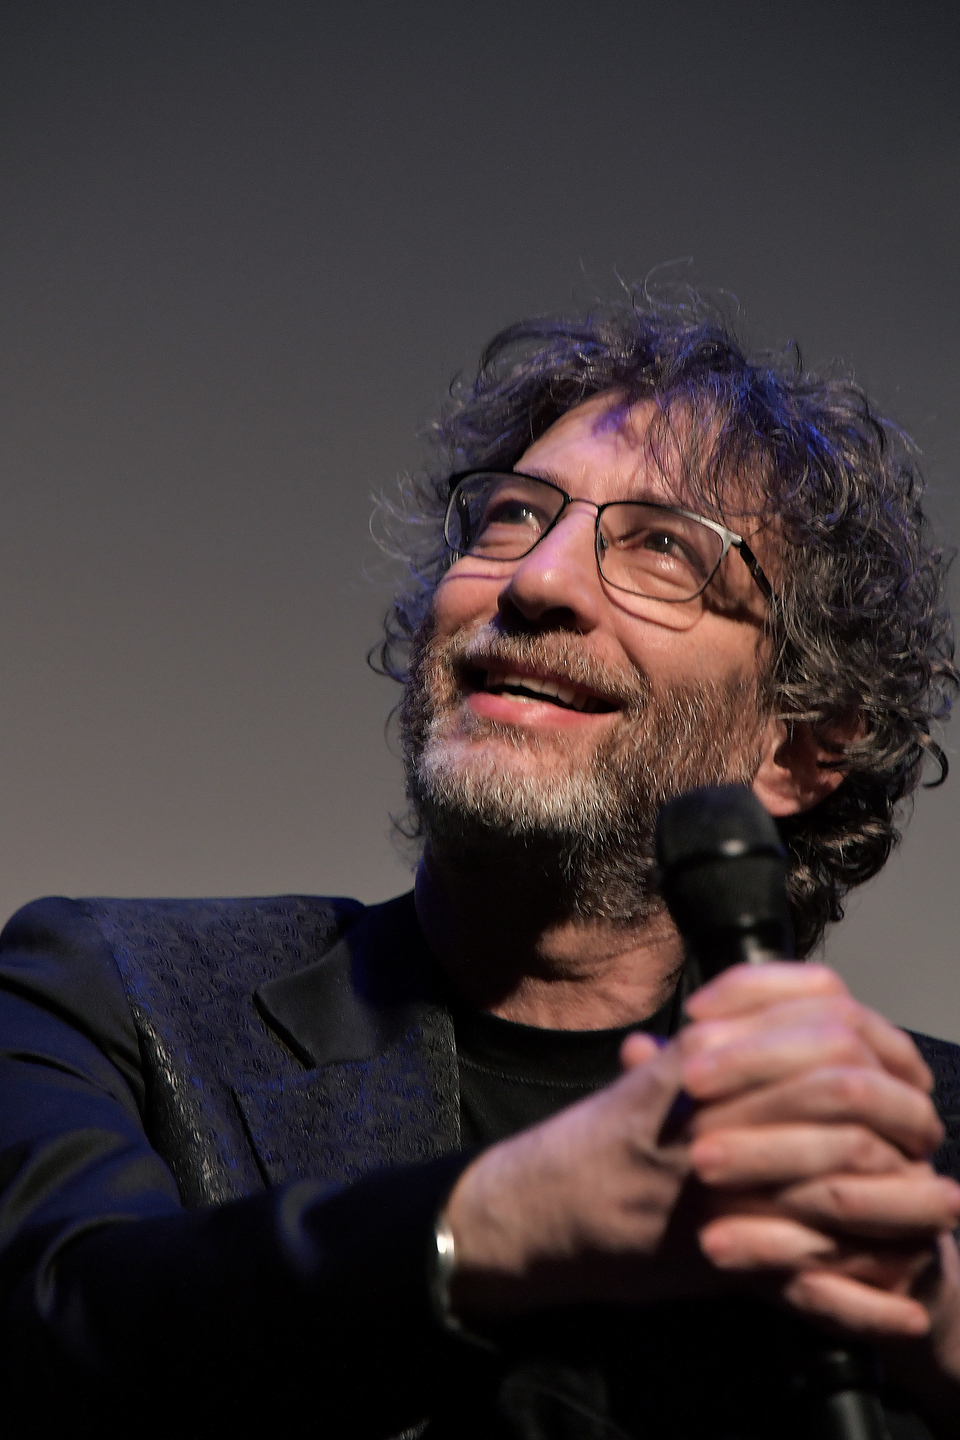 Neil Gaiman at the Good Omens: The Nice and Accurate SXSW Event – Photo by Michael Loccisano/Getty Images for SXSW